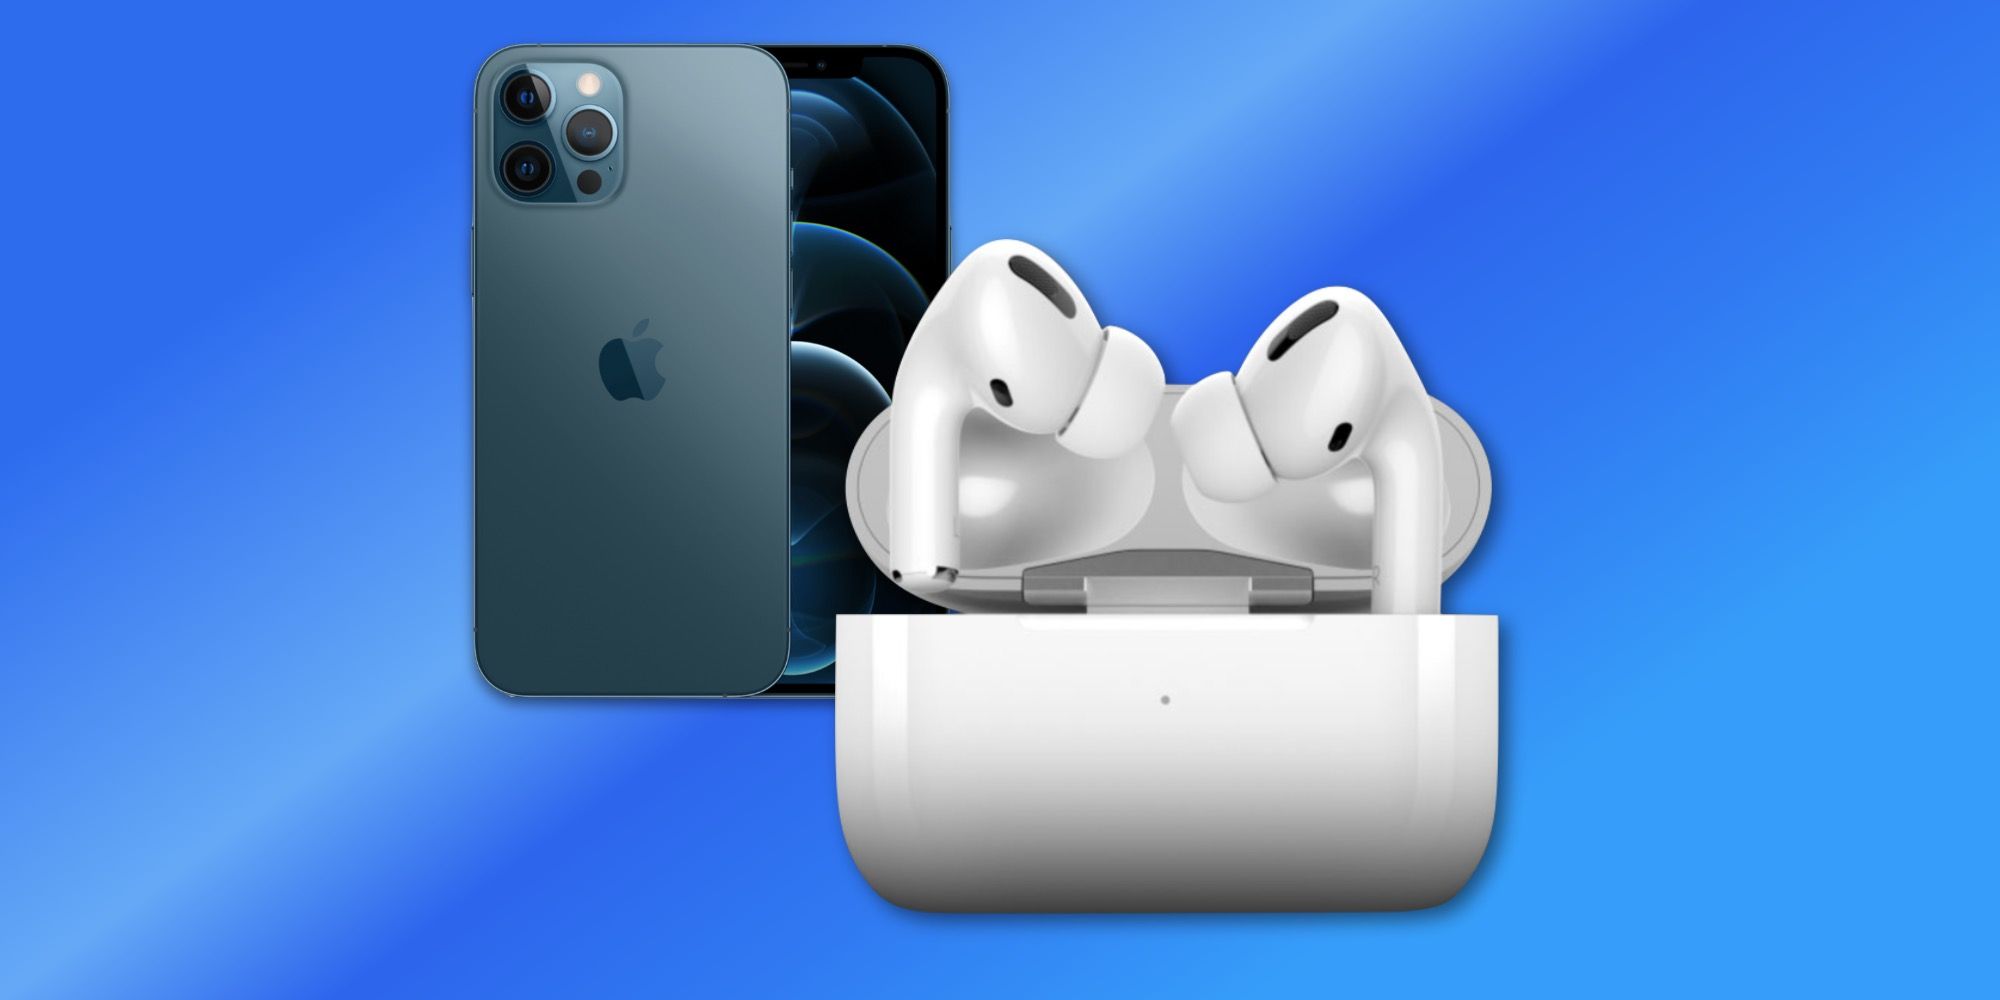 New AirPods Pro & 3rd-Gen AirPods With Shorter Stems Reportedly Coming